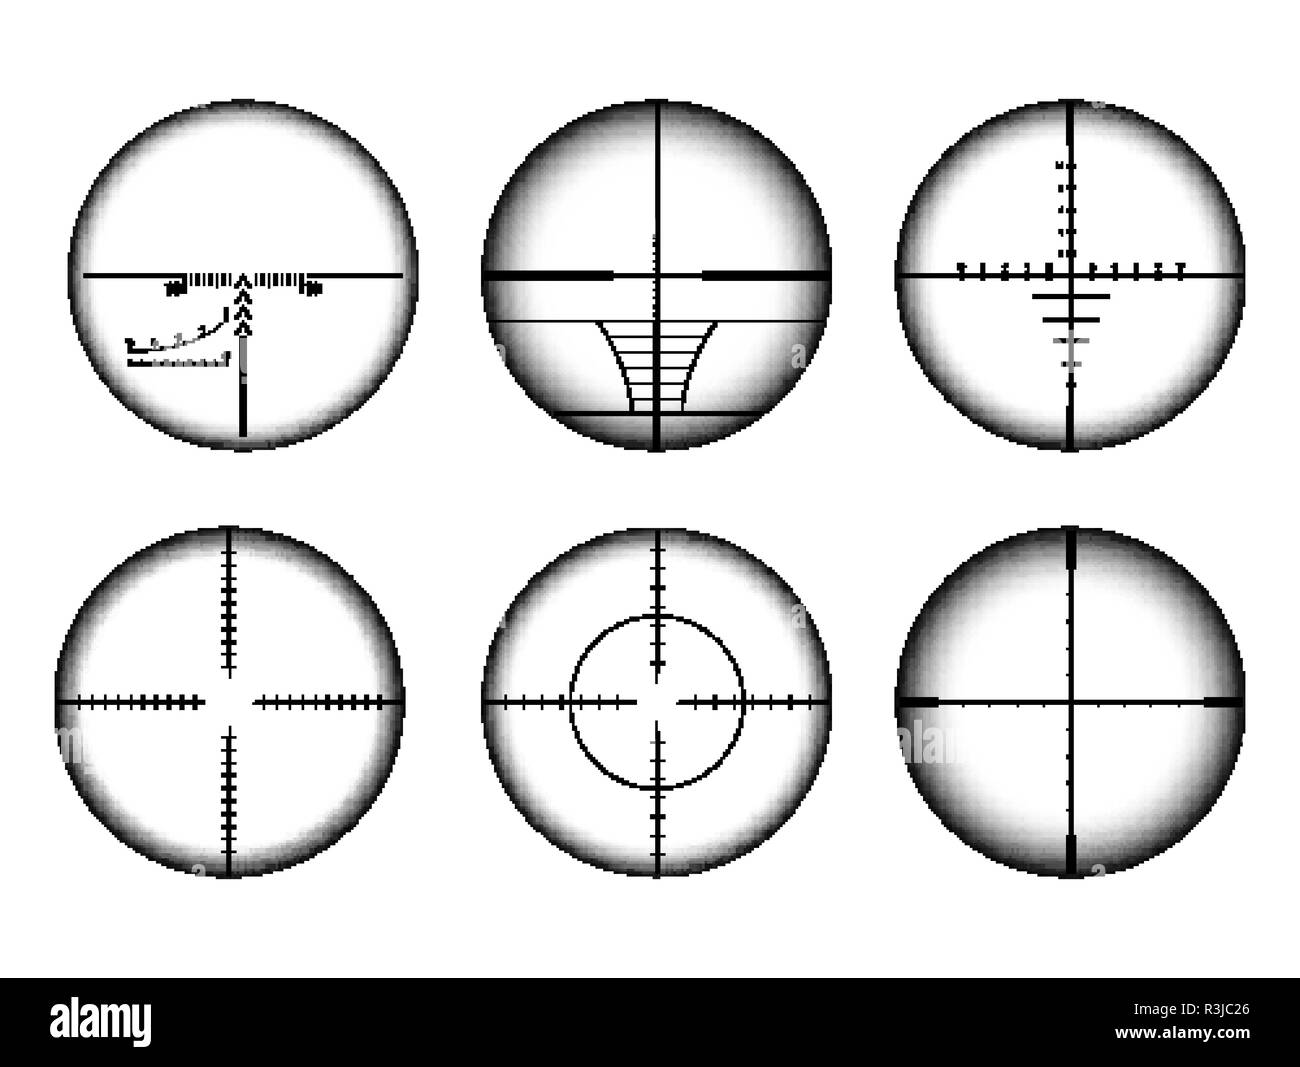 Collimato sight and sniper rifle crosshairs set. Military AR target and aim icons. Stock Vector